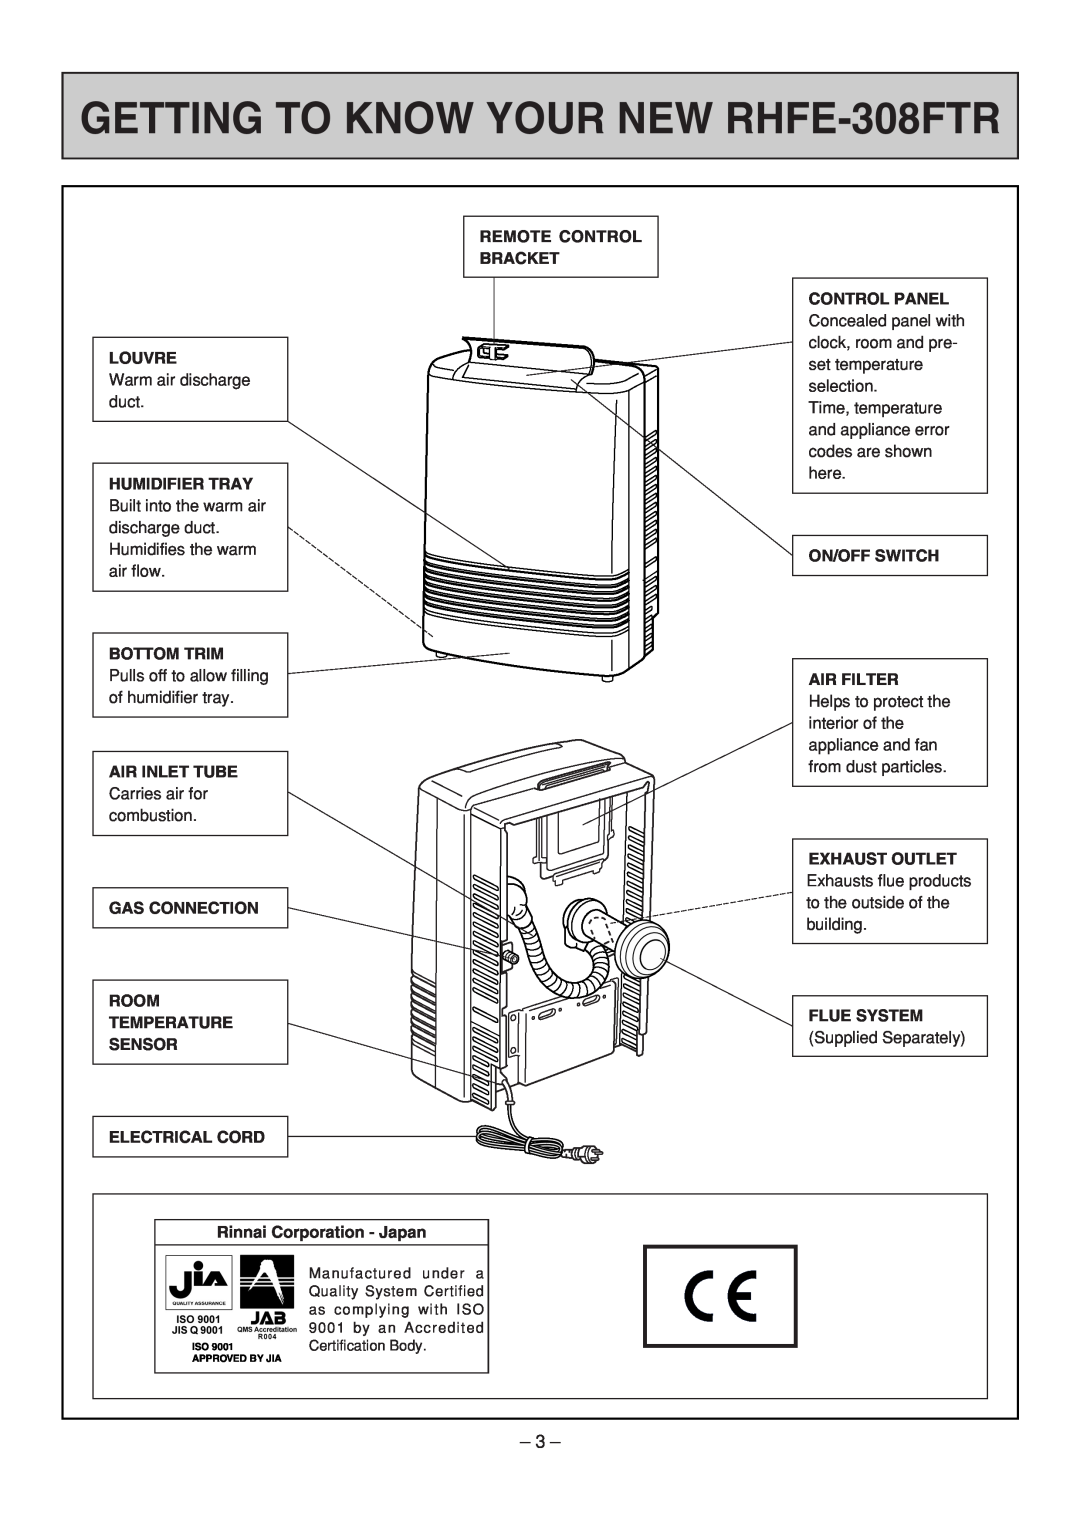 Rinnai RHFE-308 FTR user manual GETTING TO KNOW YOUR NEW RHFE-308FTR 